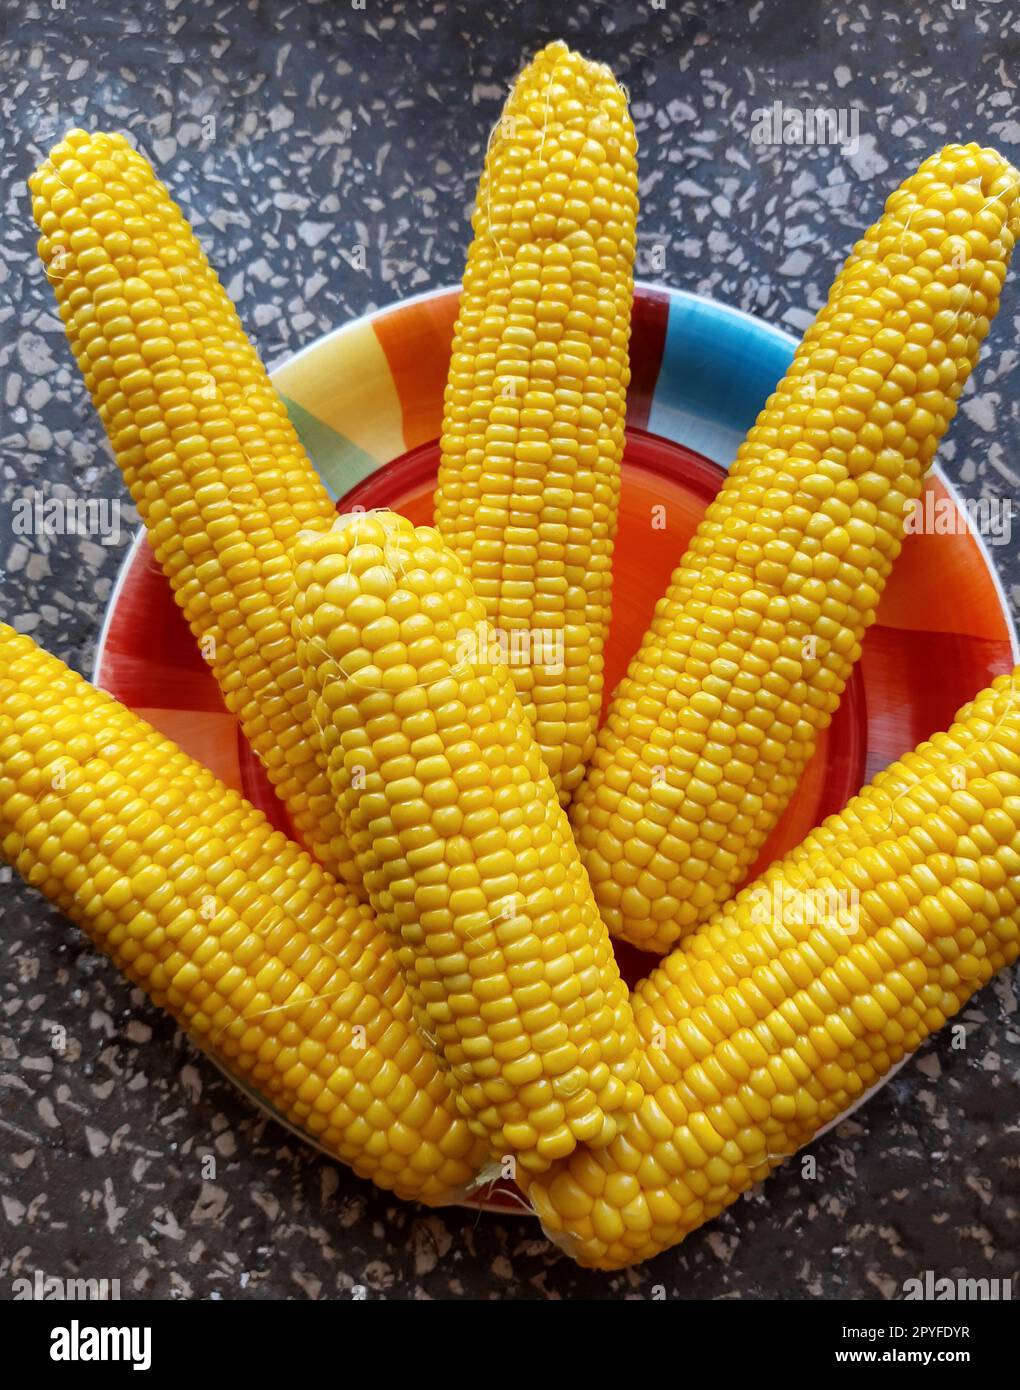 Boiled juicy corn on a plate Stock Photo